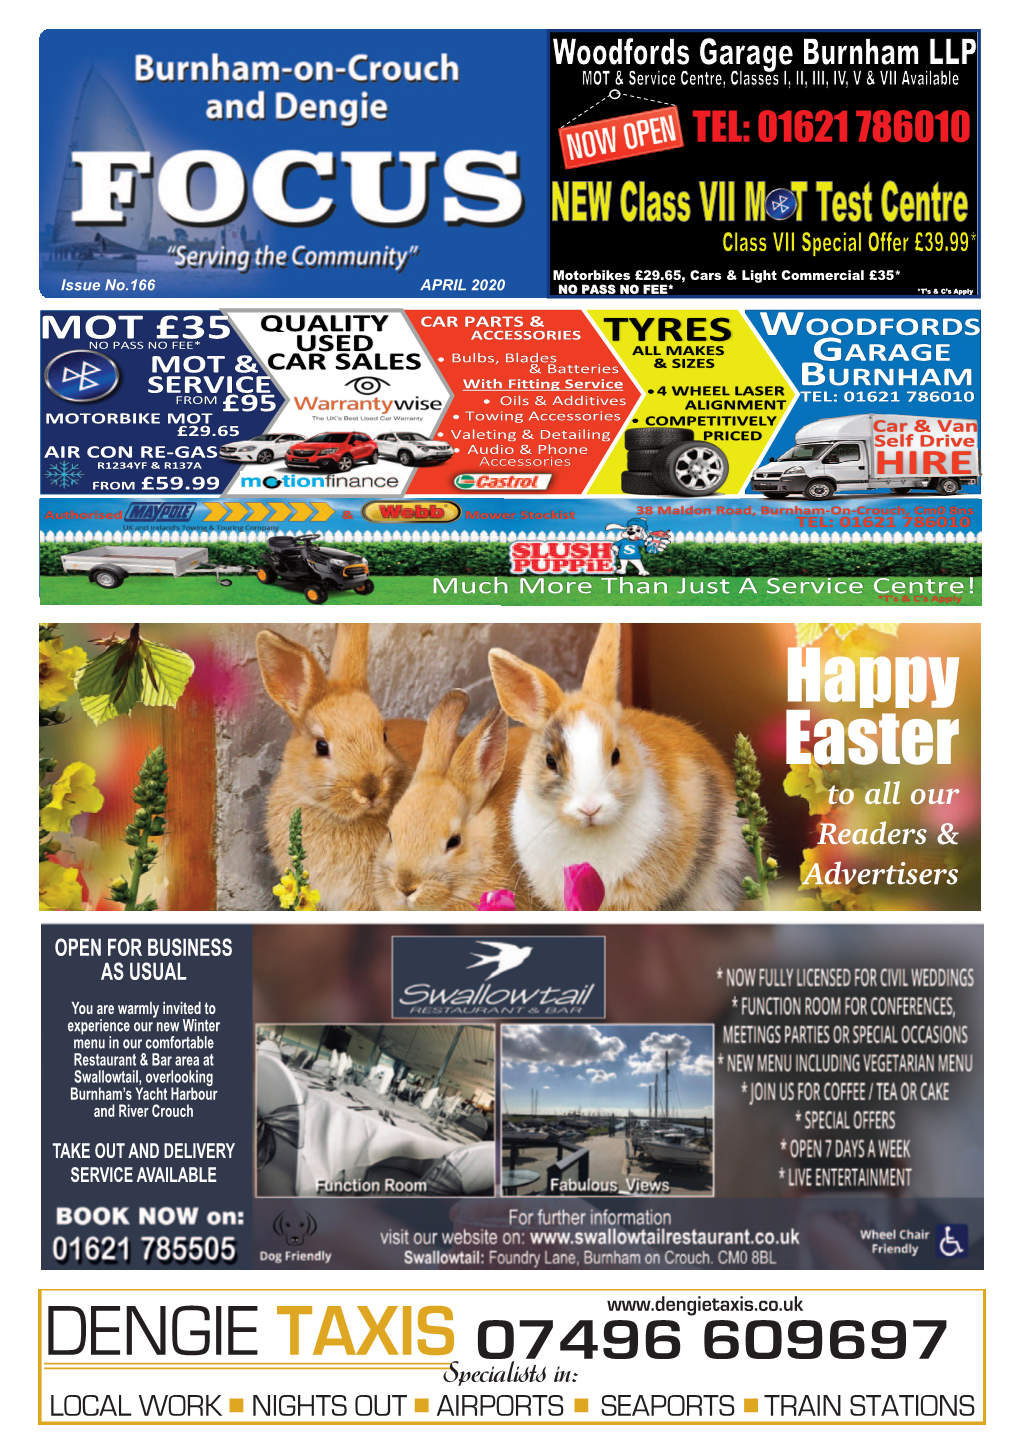 Happy Easter to All Our Readers & Advertisers